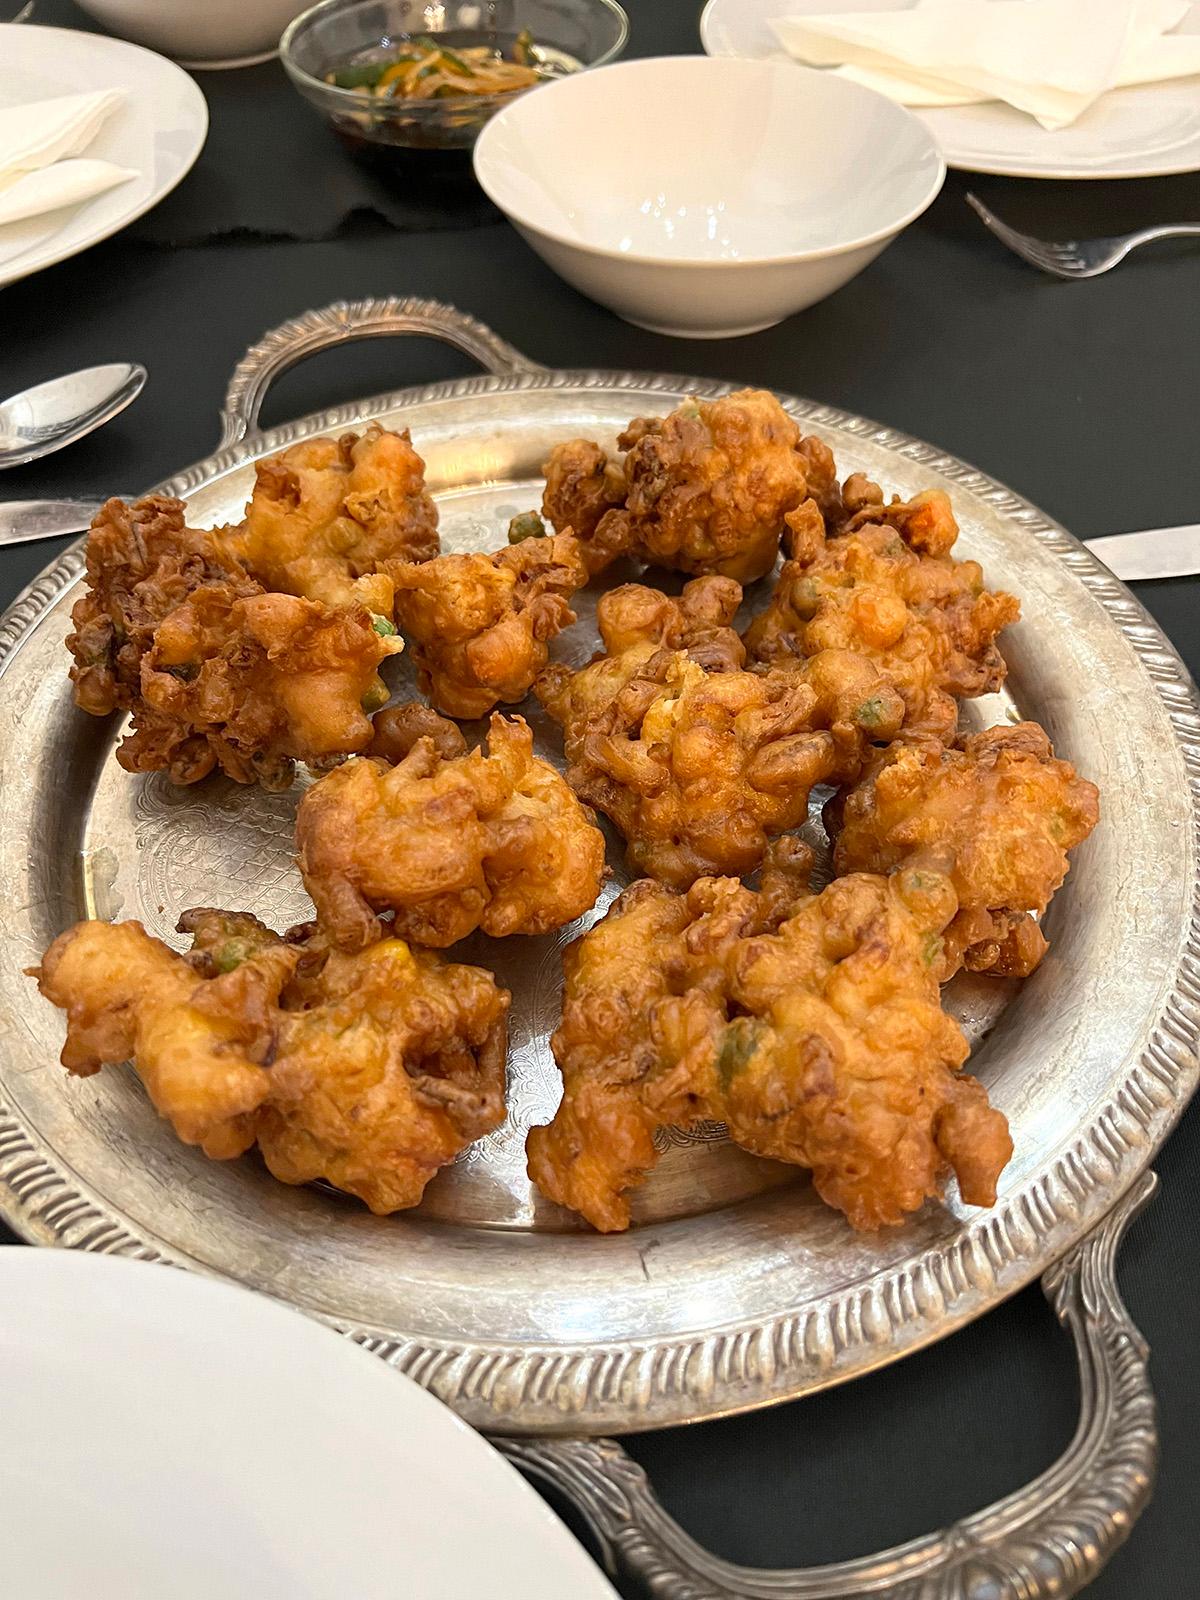 An offshoot of the American fritter, Chamorro shrimp patties (bunelos huang) are a favorite food on the island of Guam. (Gretchen McKay/Pittsburgh Post-Gazette/TNS)